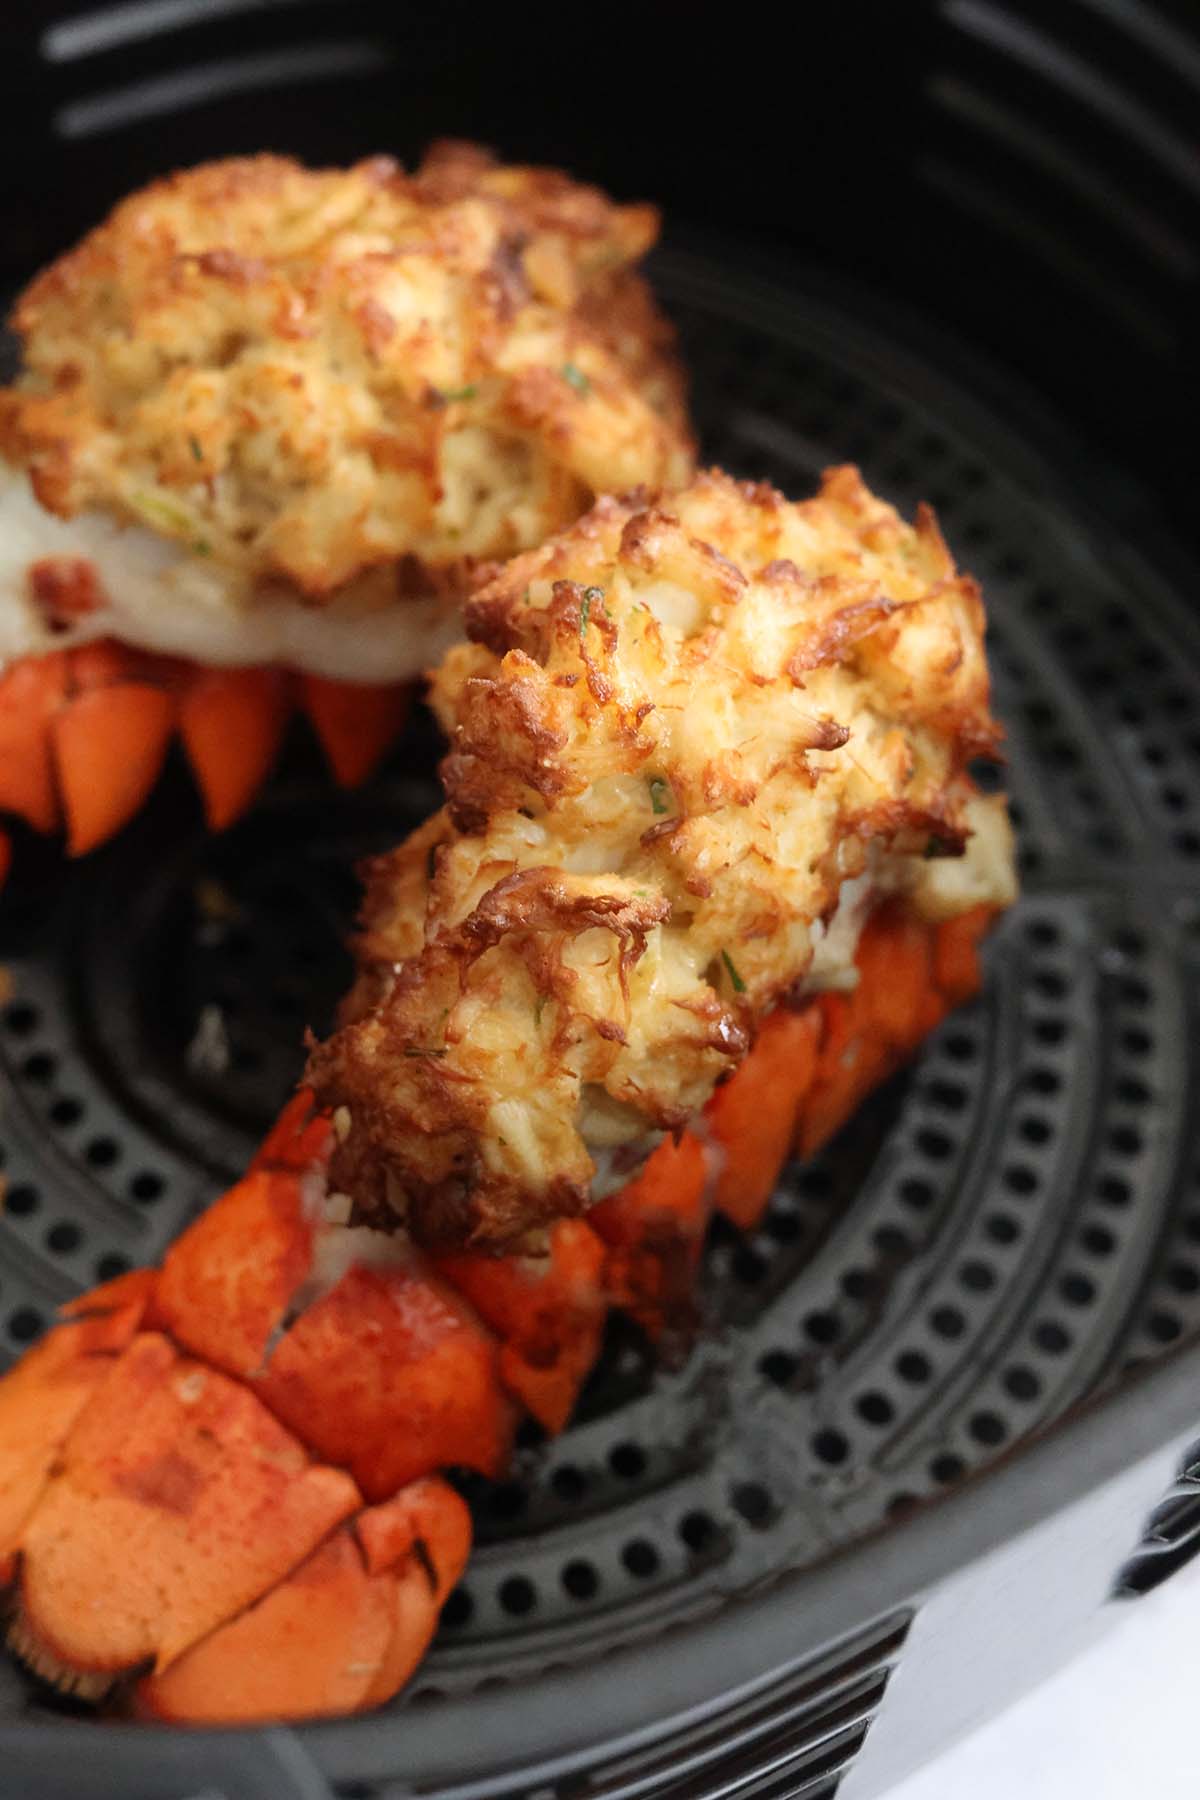 two cooked stuffed lobster tails in the air fryer basket.